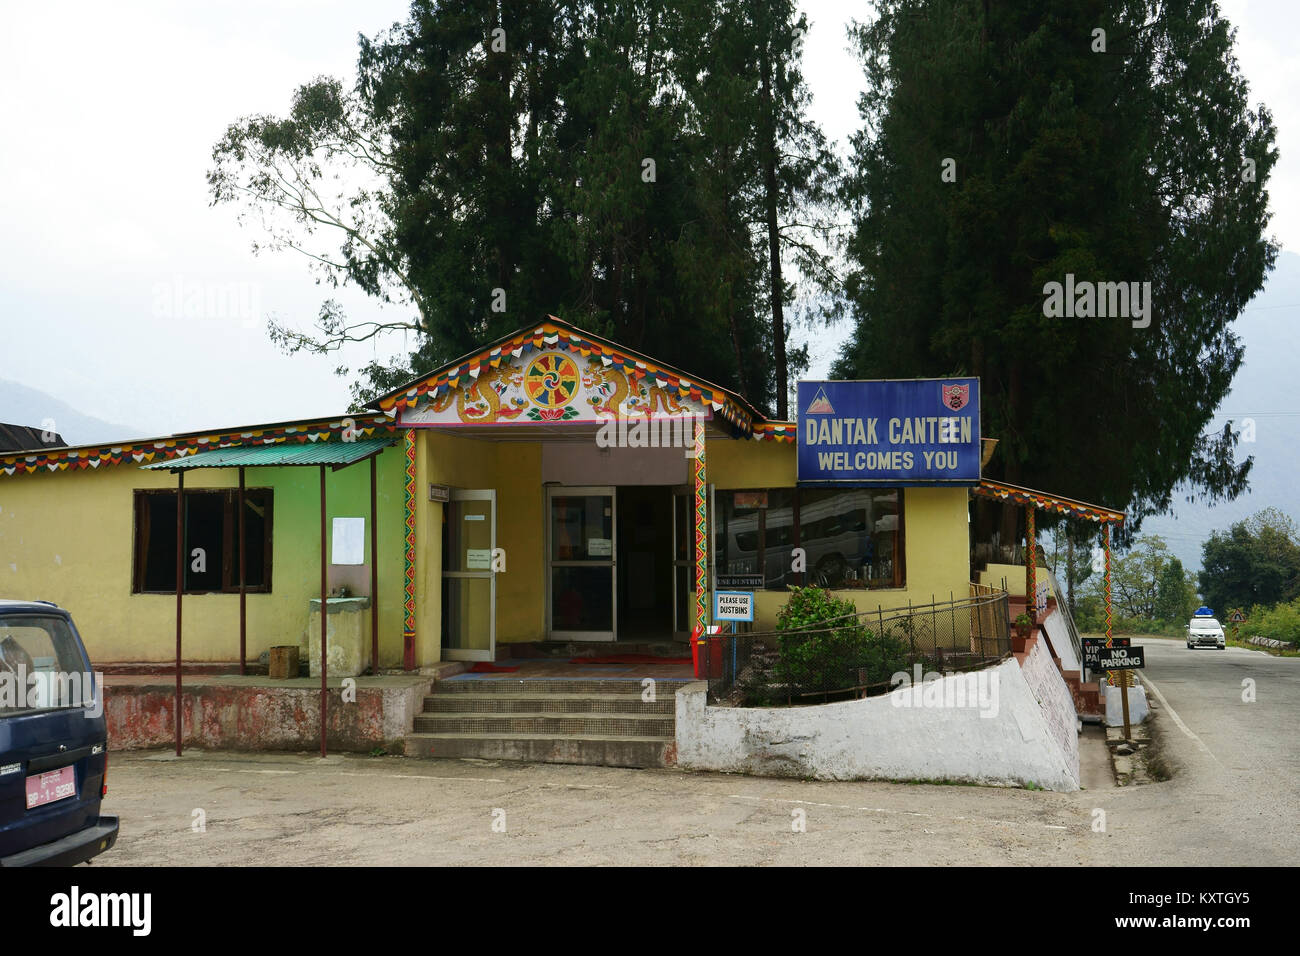 Canteen or restaurant of the Dantak Boder Roads and Bhutan Development Organisation along Road from Phuentsholing to Thimphu, Bhutan Stock Photo